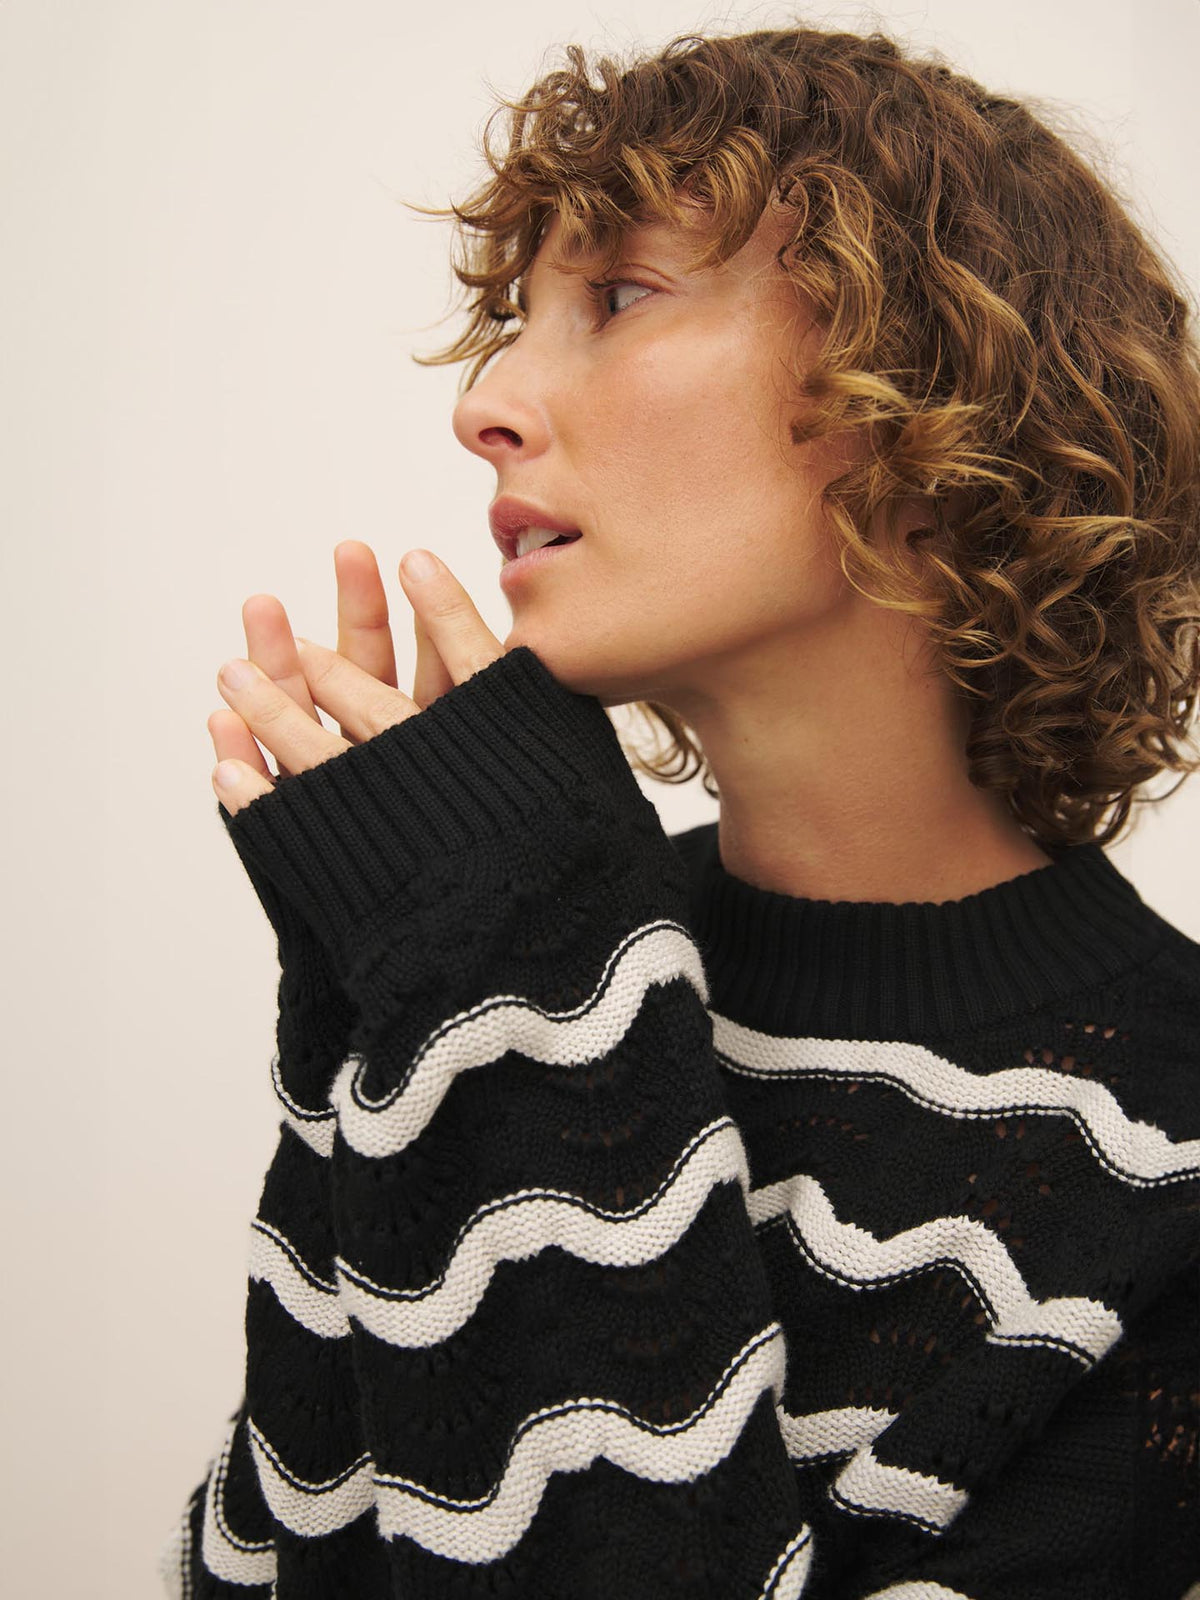 Pensive individual with curly hair wearing a black and white Kowtow wave pattern sweater, gazing to the side.